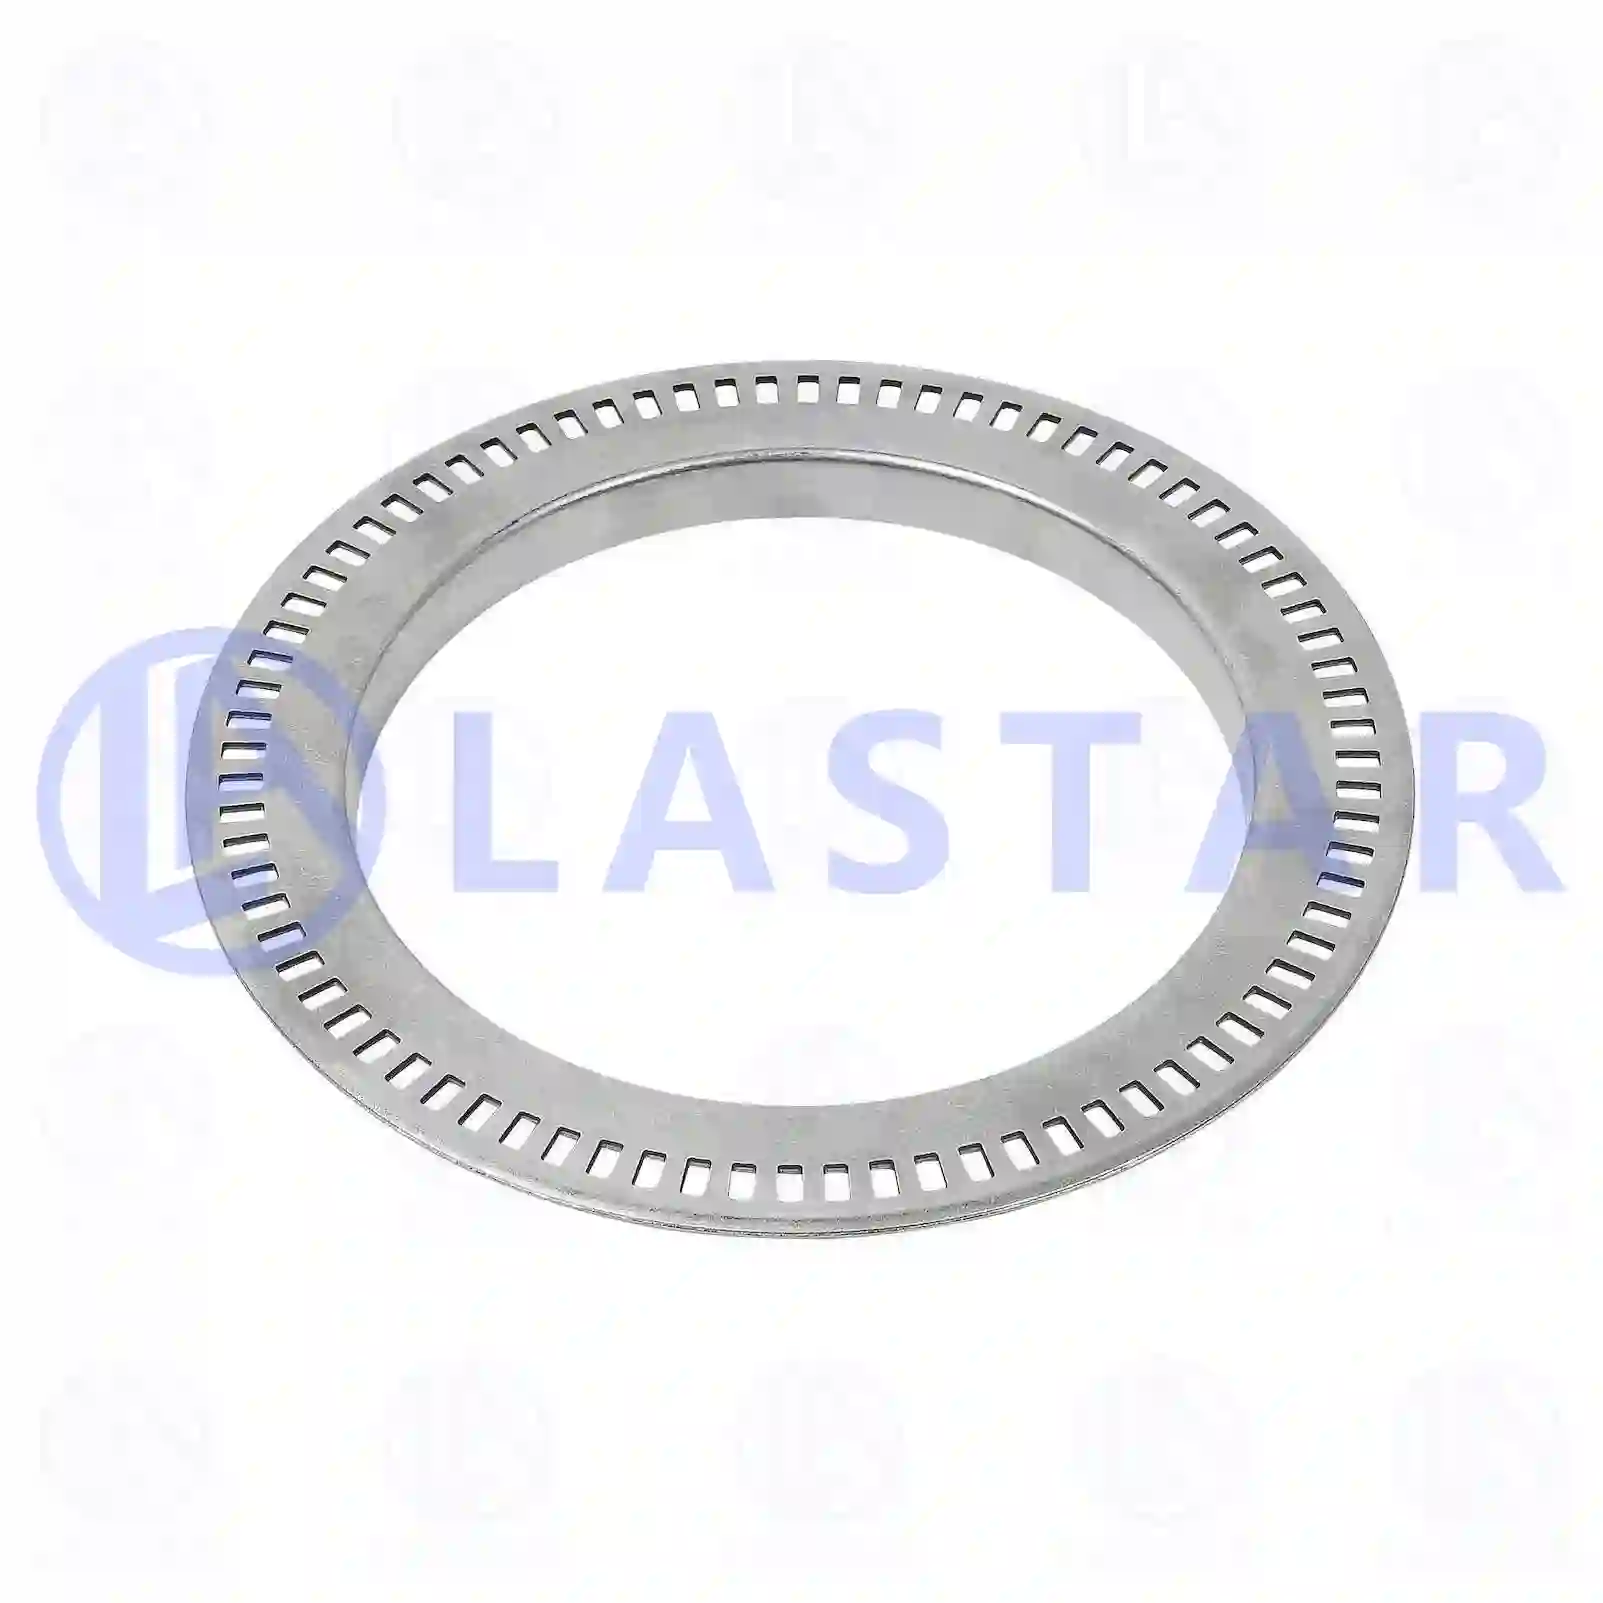 ABS ring, 77726378, 9733561015, ZG50018-0008, , ||  77726378 Lastar Spare Part | Truck Spare Parts, Auotomotive Spare Parts ABS ring, 77726378, 9733561015, ZG50018-0008, , ||  77726378 Lastar Spare Part | Truck Spare Parts, Auotomotive Spare Parts